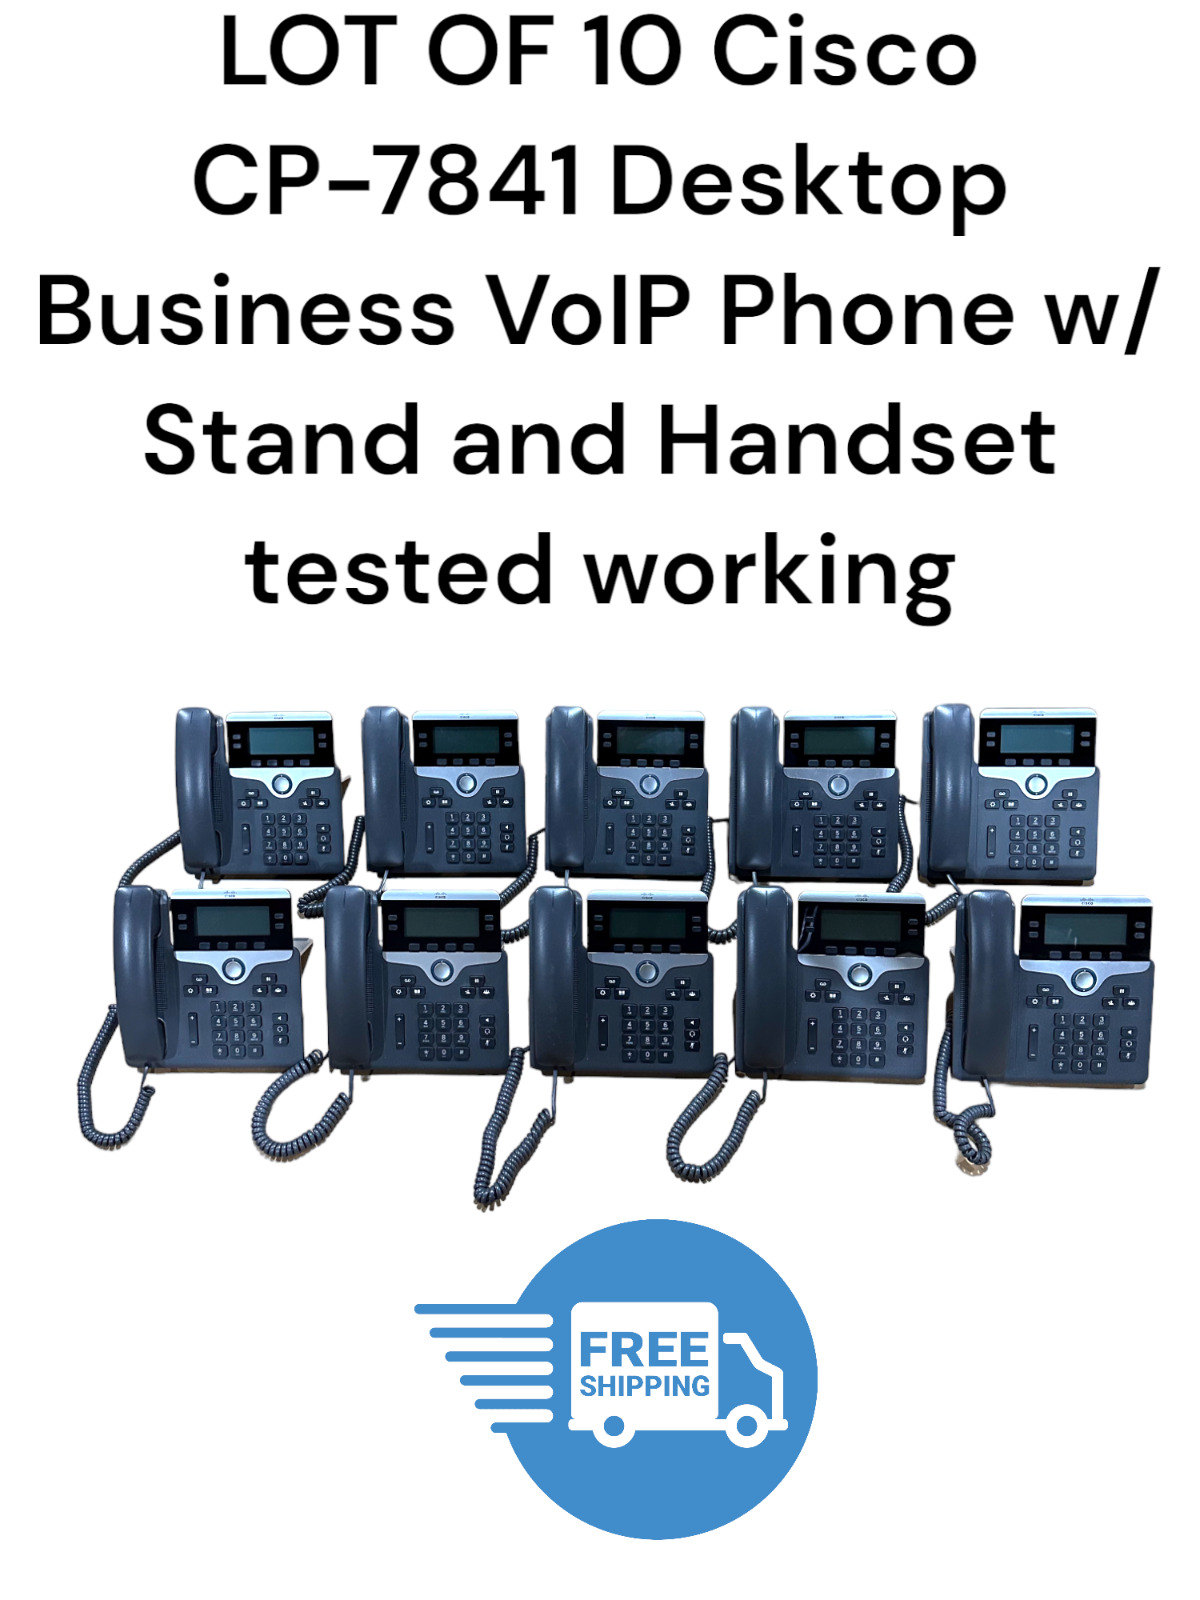 LOT OF 10 Cisco CP-7841 Desktop Business VoIP Phone w/ Stand and Handset & cord